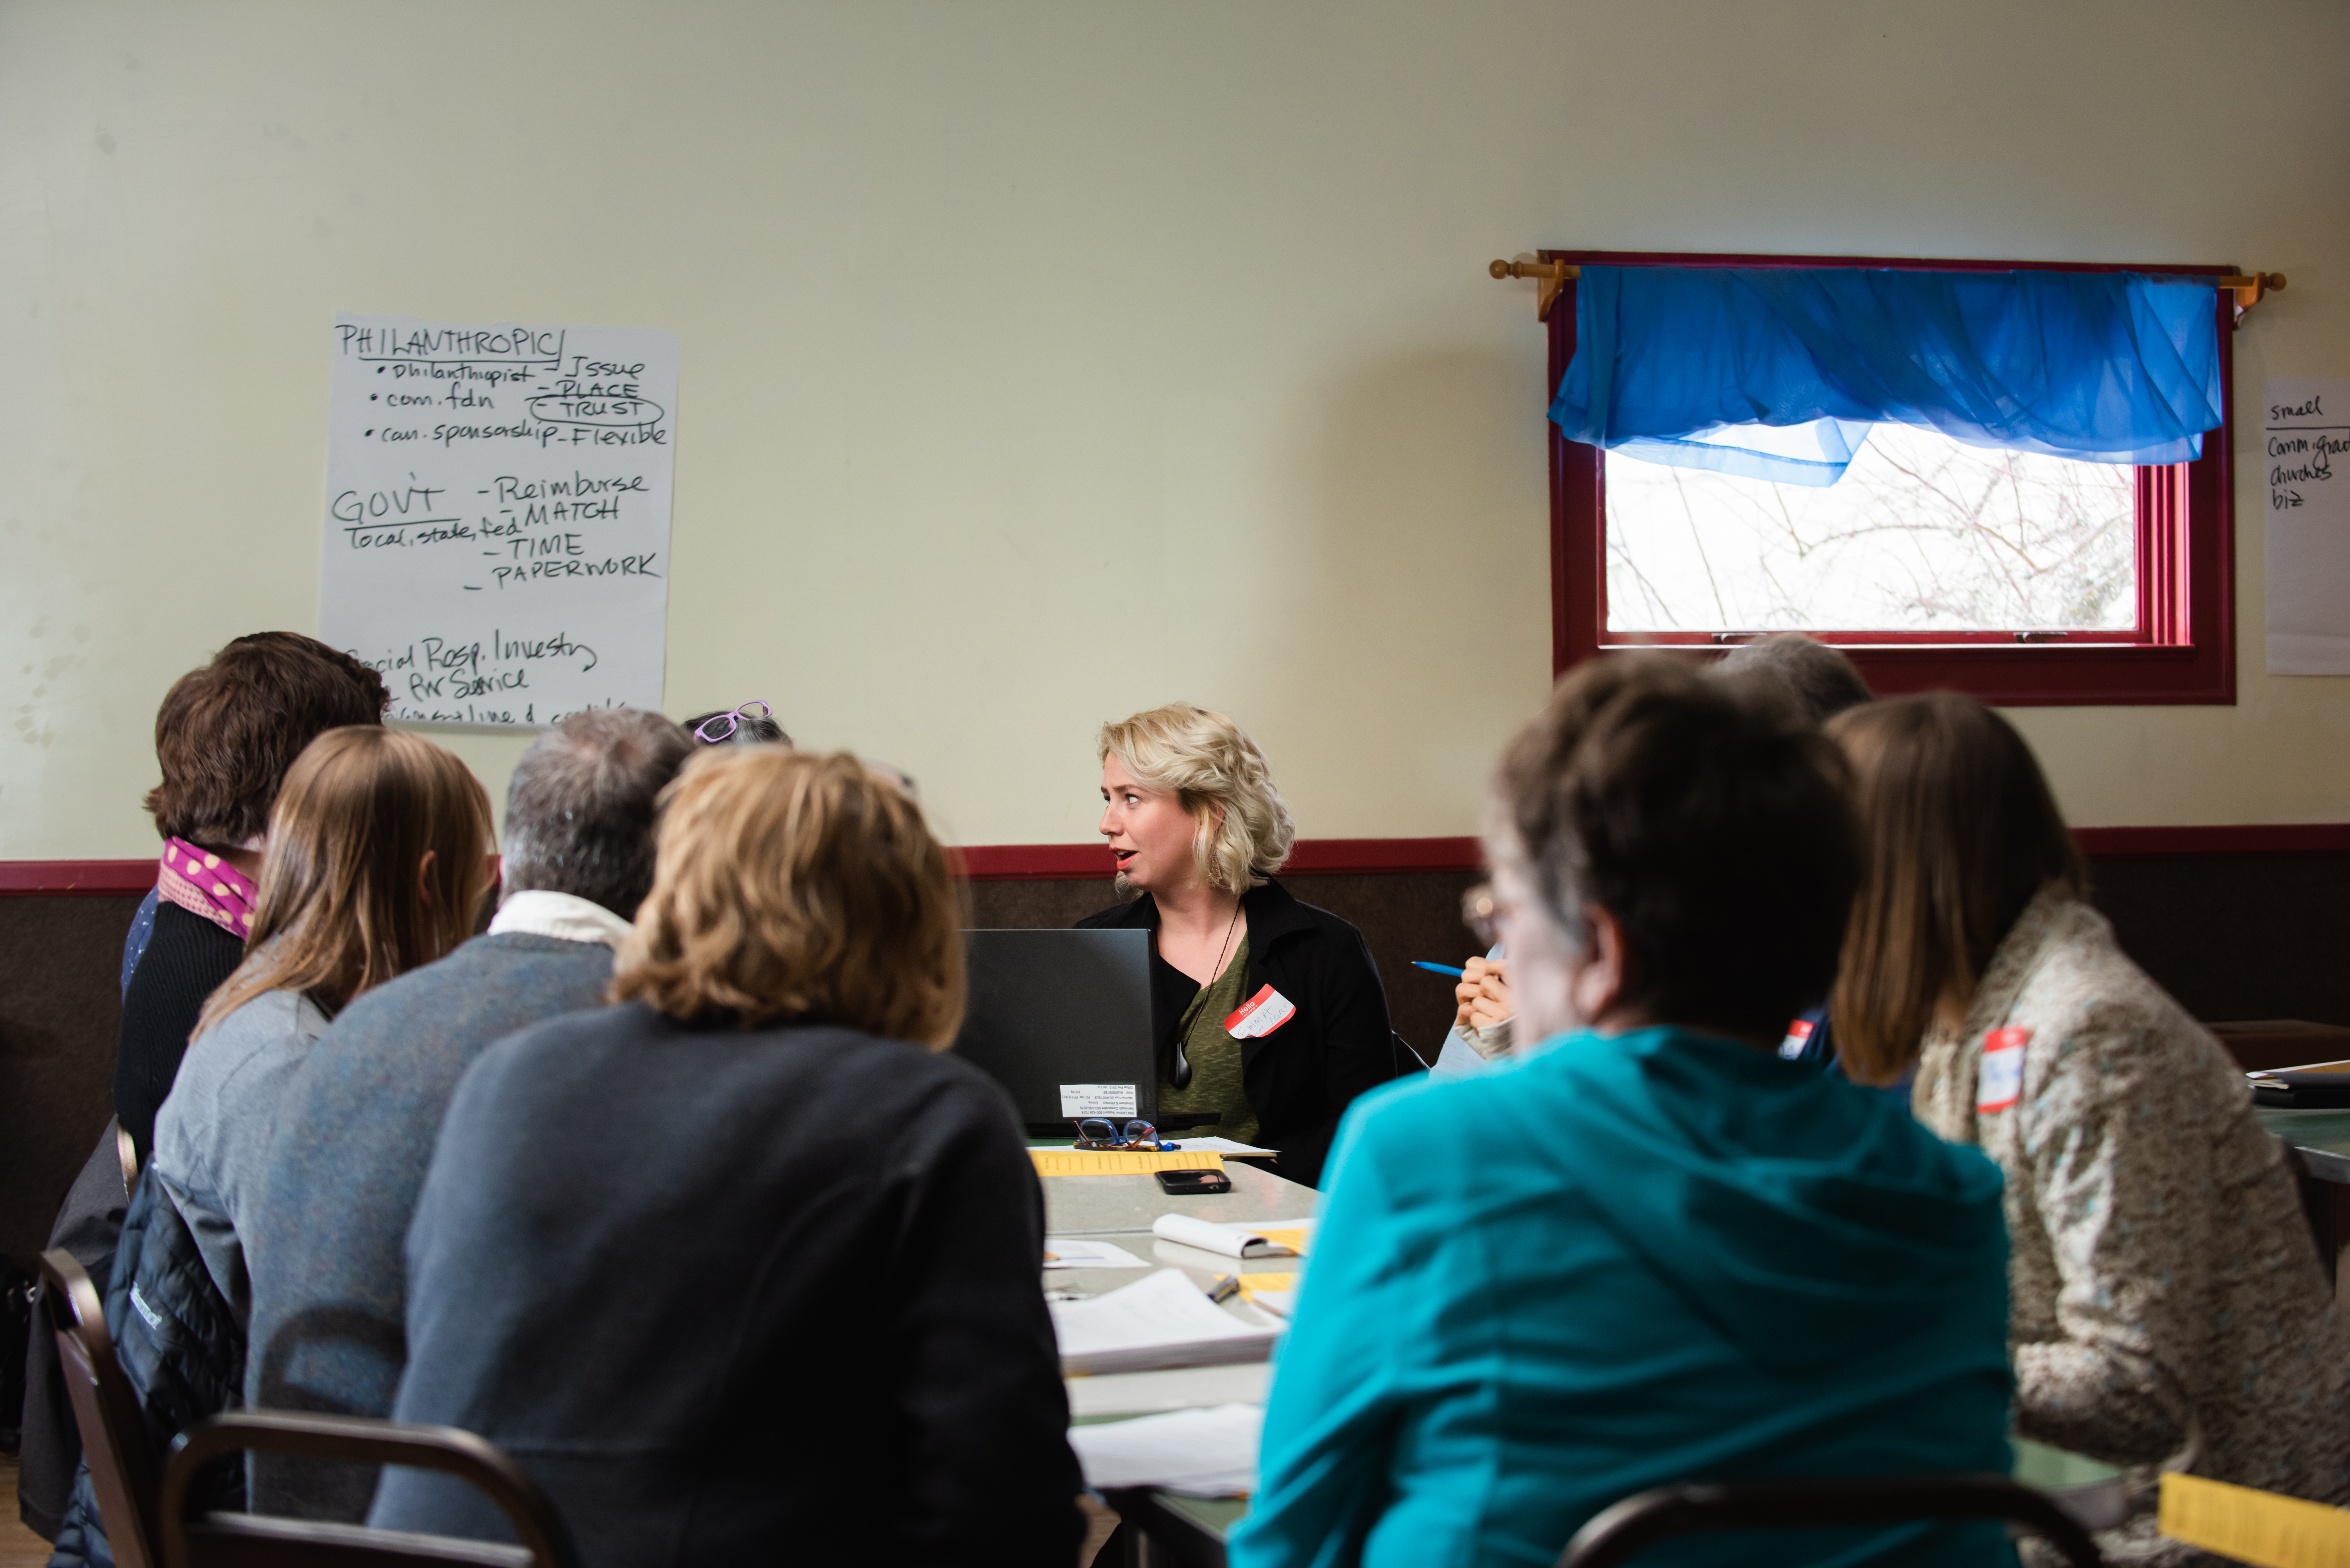 Making Fund Finding Fun: A Grant Writing Workshop attended by over 40 organizations and towns